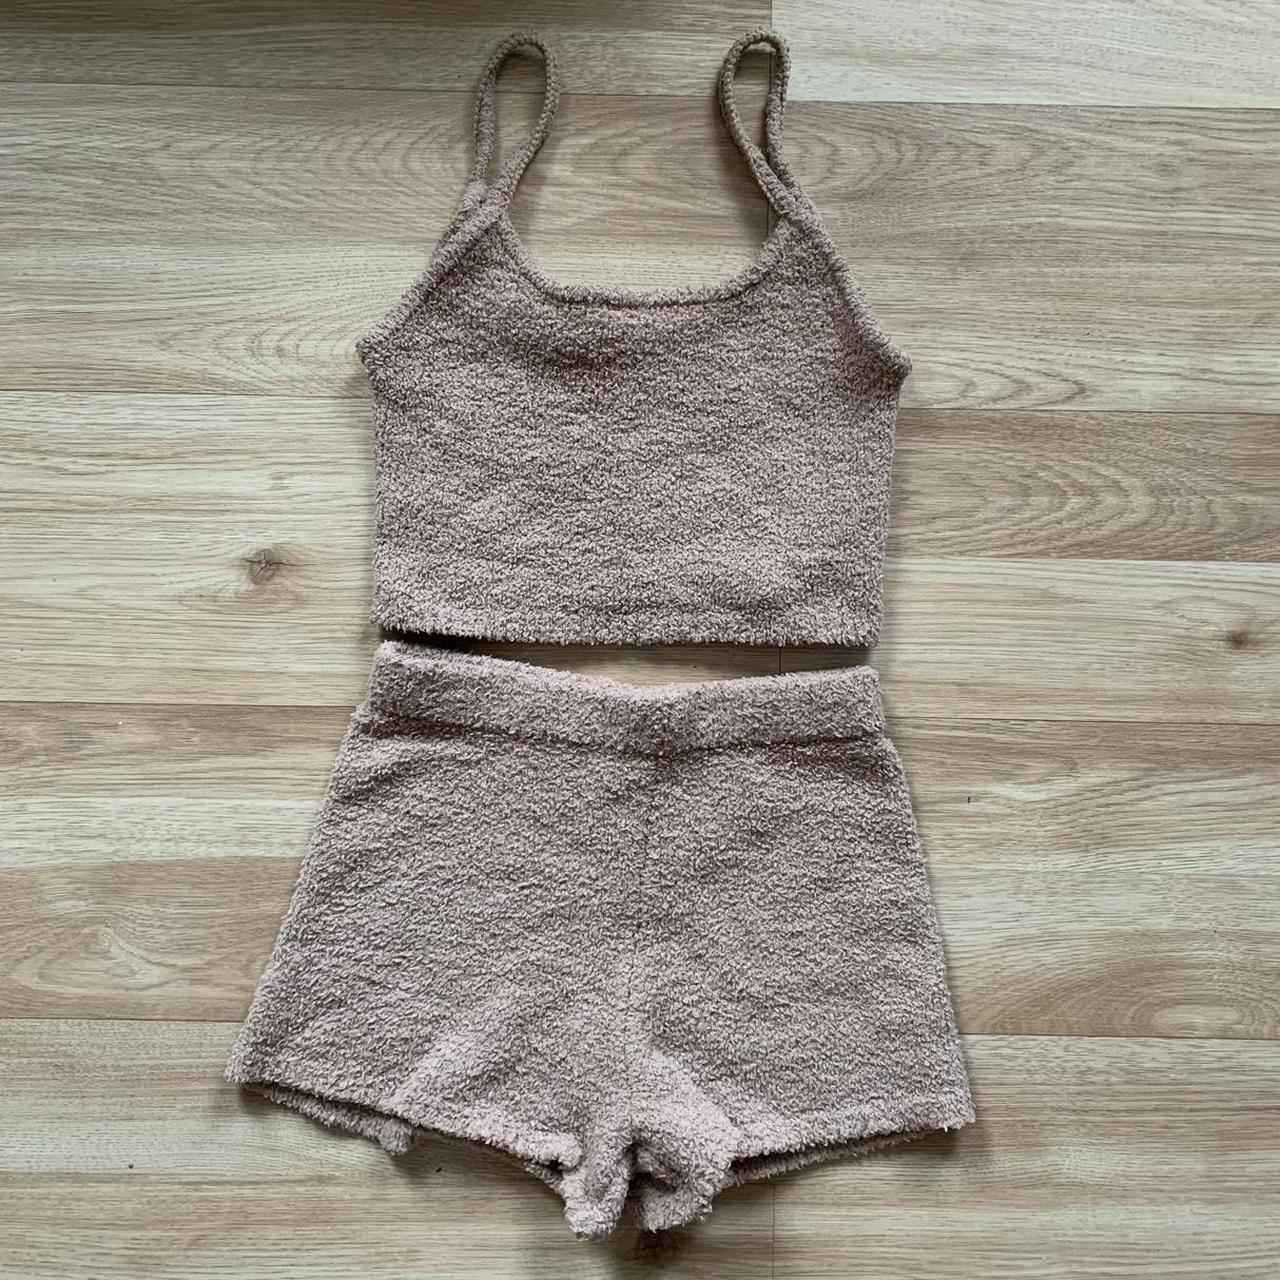 Fuzzy Pajama Set / Super cute and comfy, but it’s... - Depop